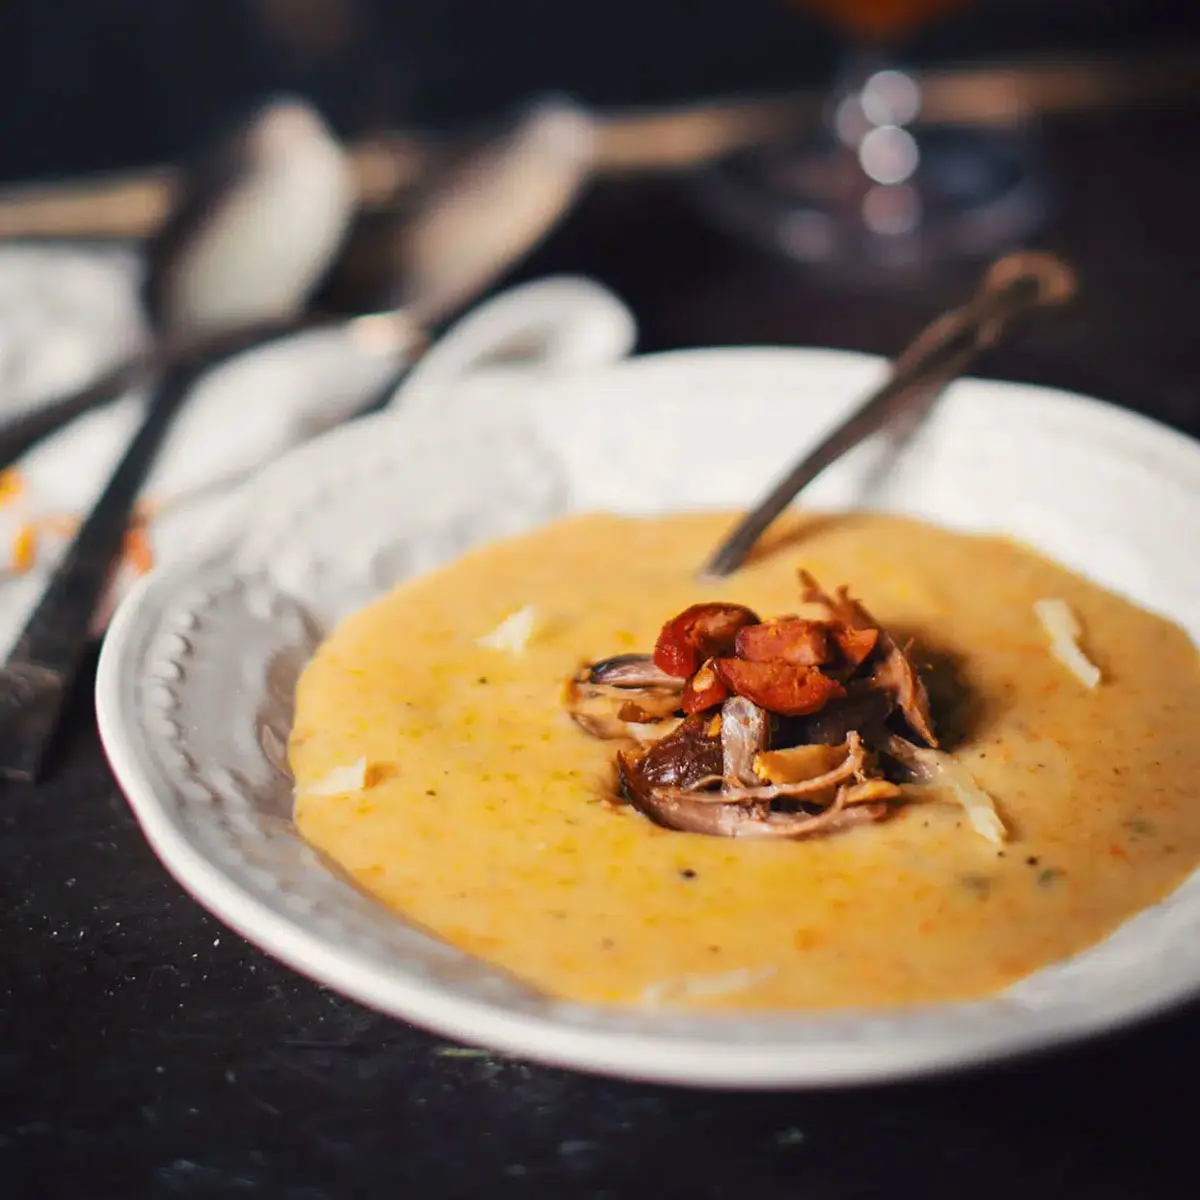 Cheese and Don de Dieu beer soup